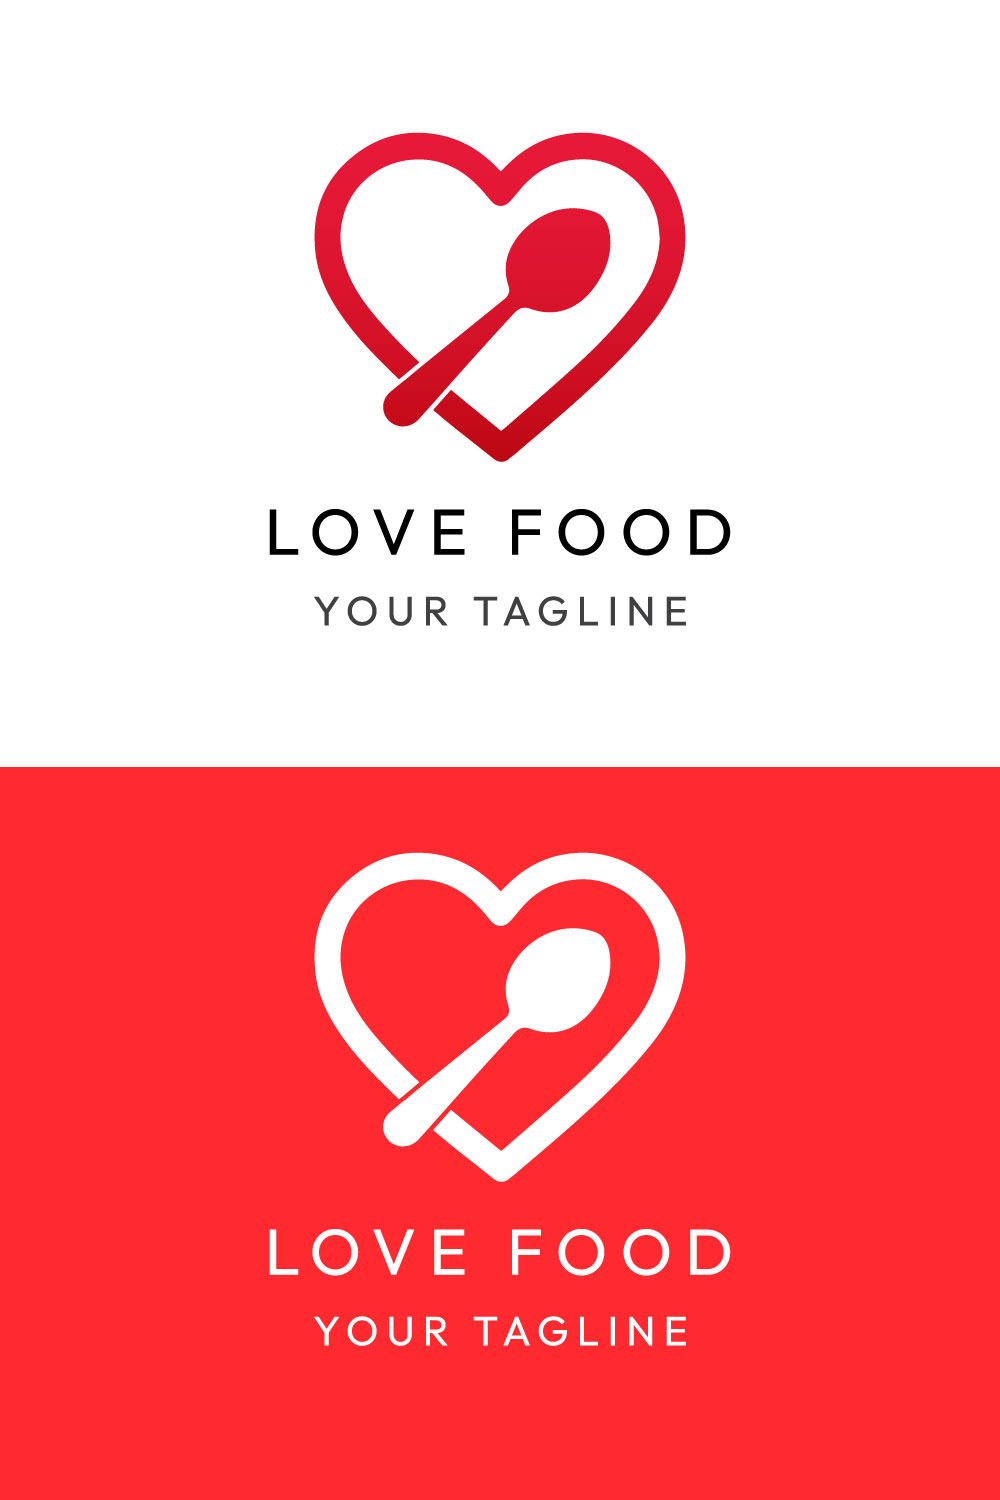 Love food logo pinterest preview image.